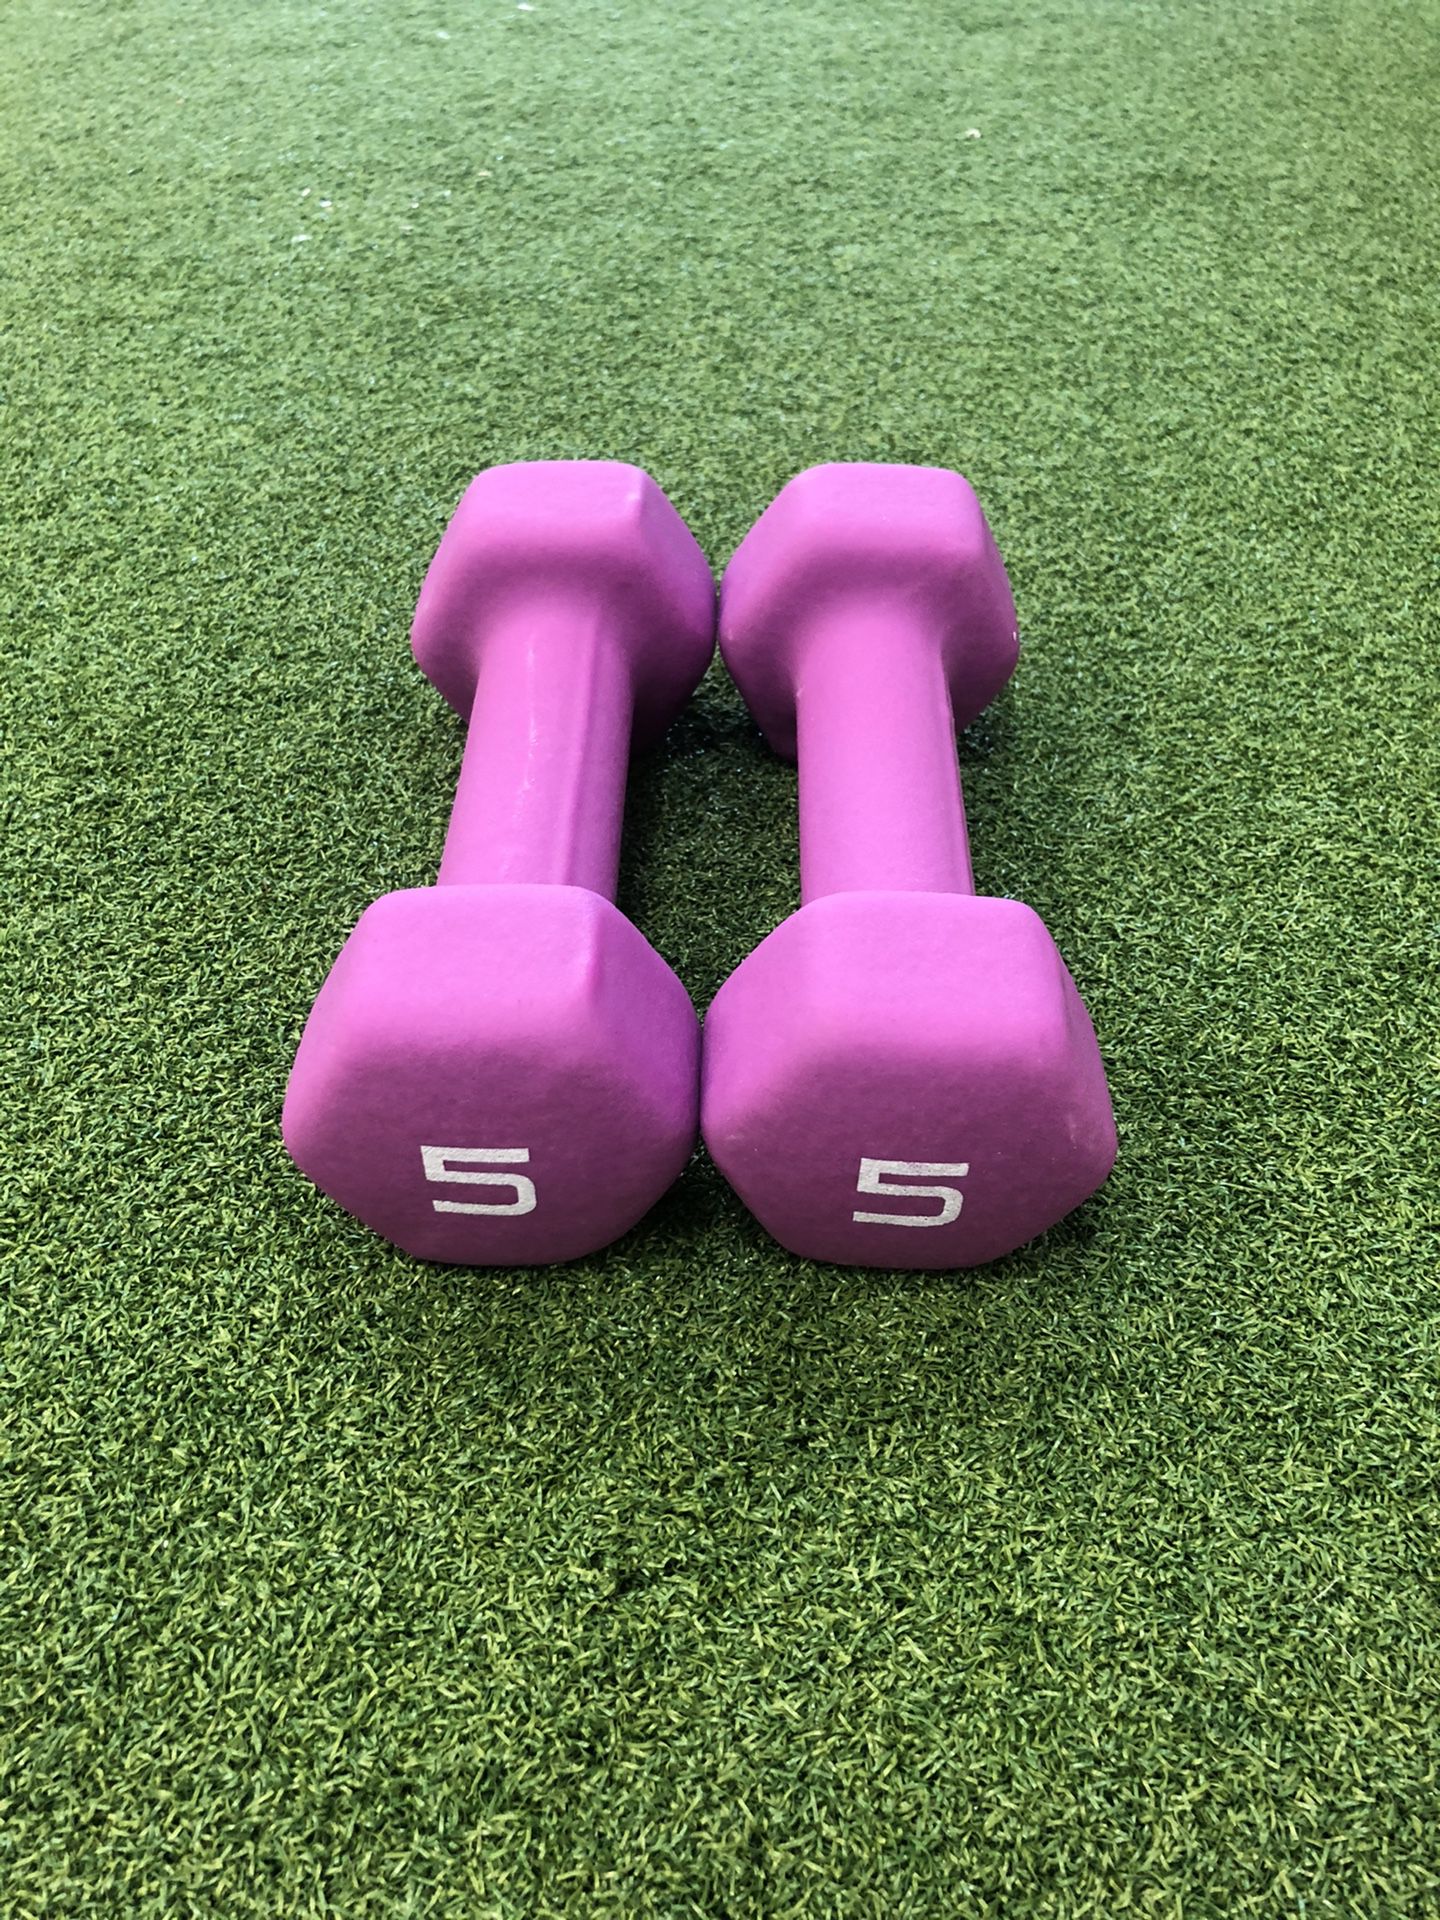 Dumbbell 💪🏻 Weights Set 5 lbs -Brand New!